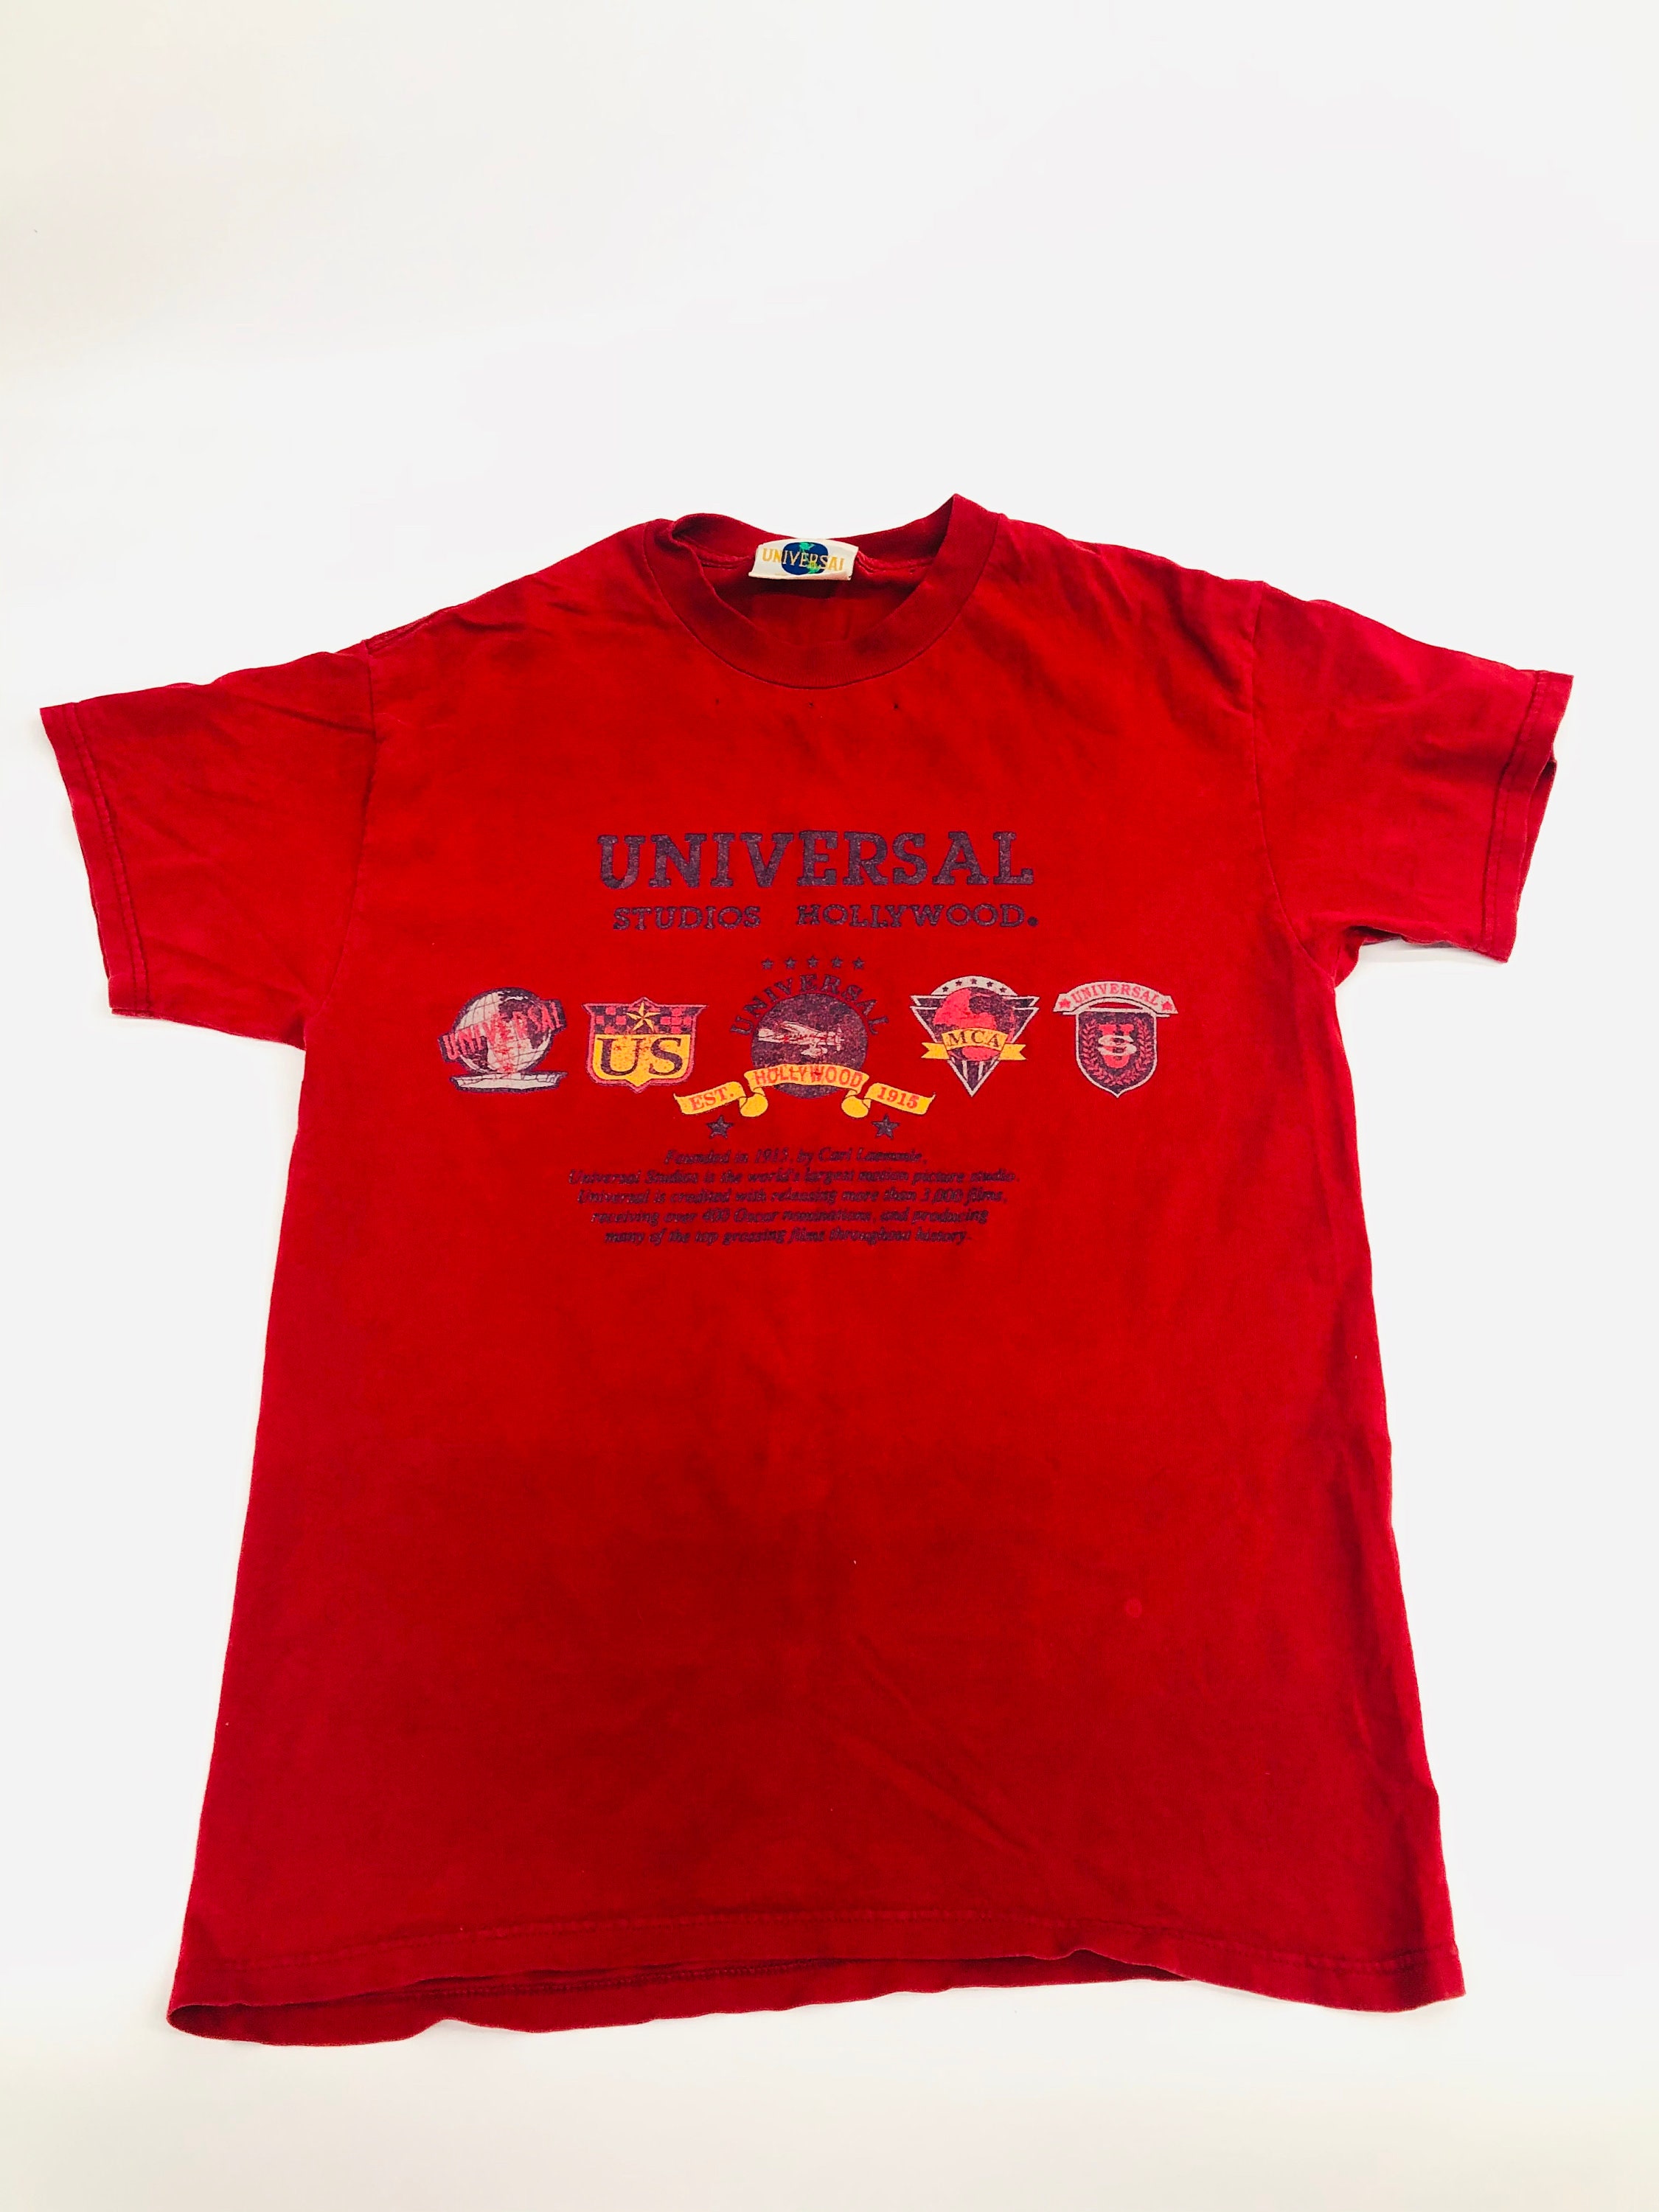 Vintage Universal Studios Hollywood T-shirt Red Made in Usa - Etsy